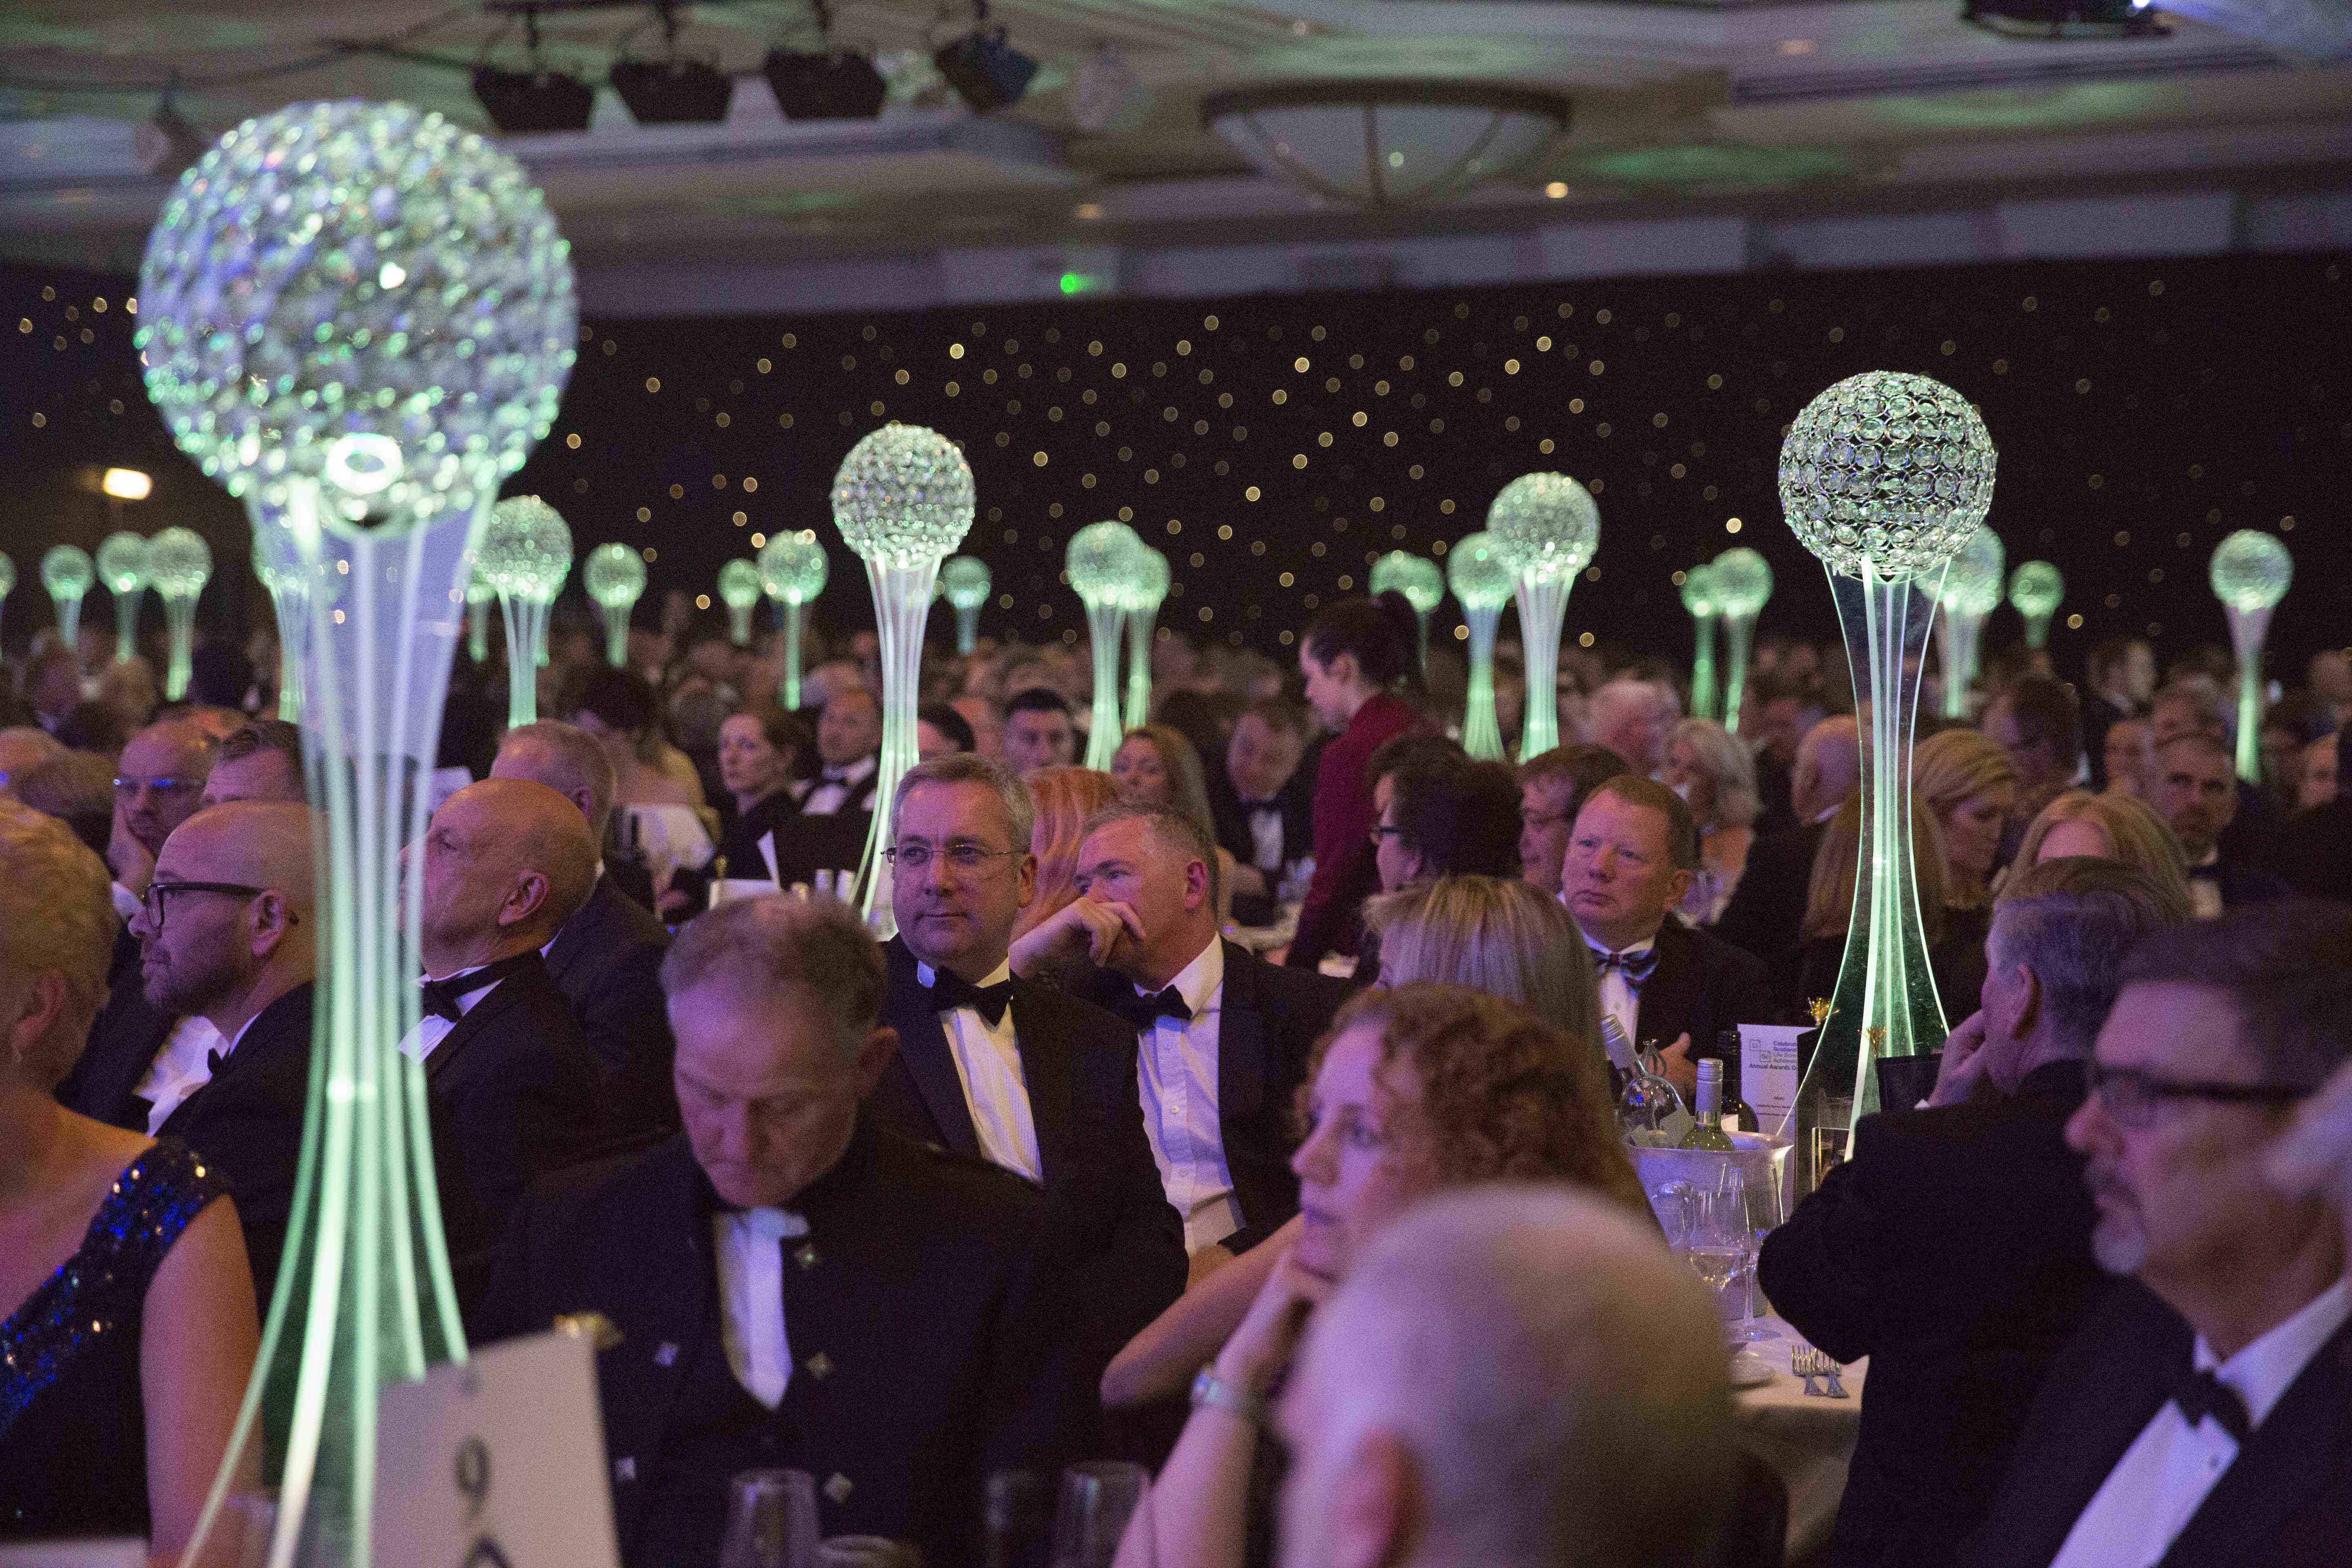 Scotland’s Life Sciences Dinner & Annual Awards Celebration: 13th May 2022